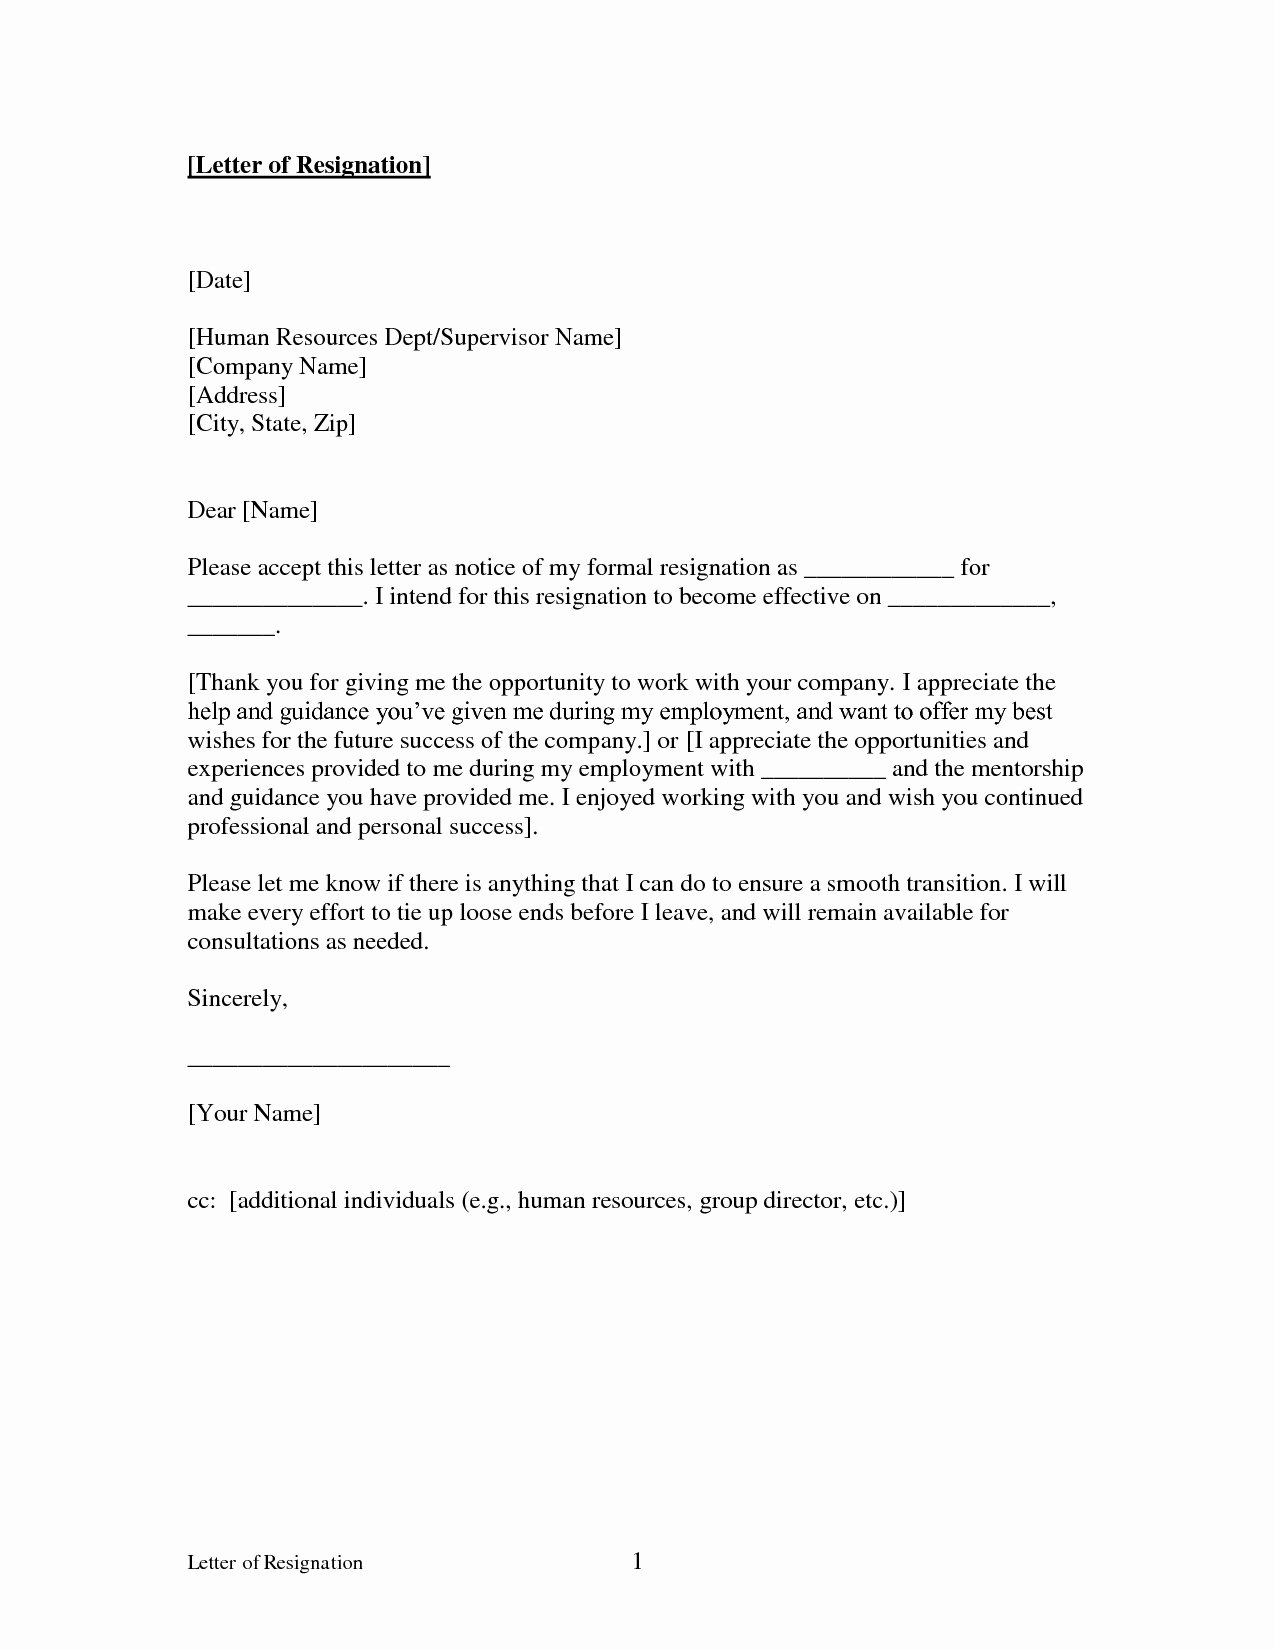 real estate introduction letter to friends template